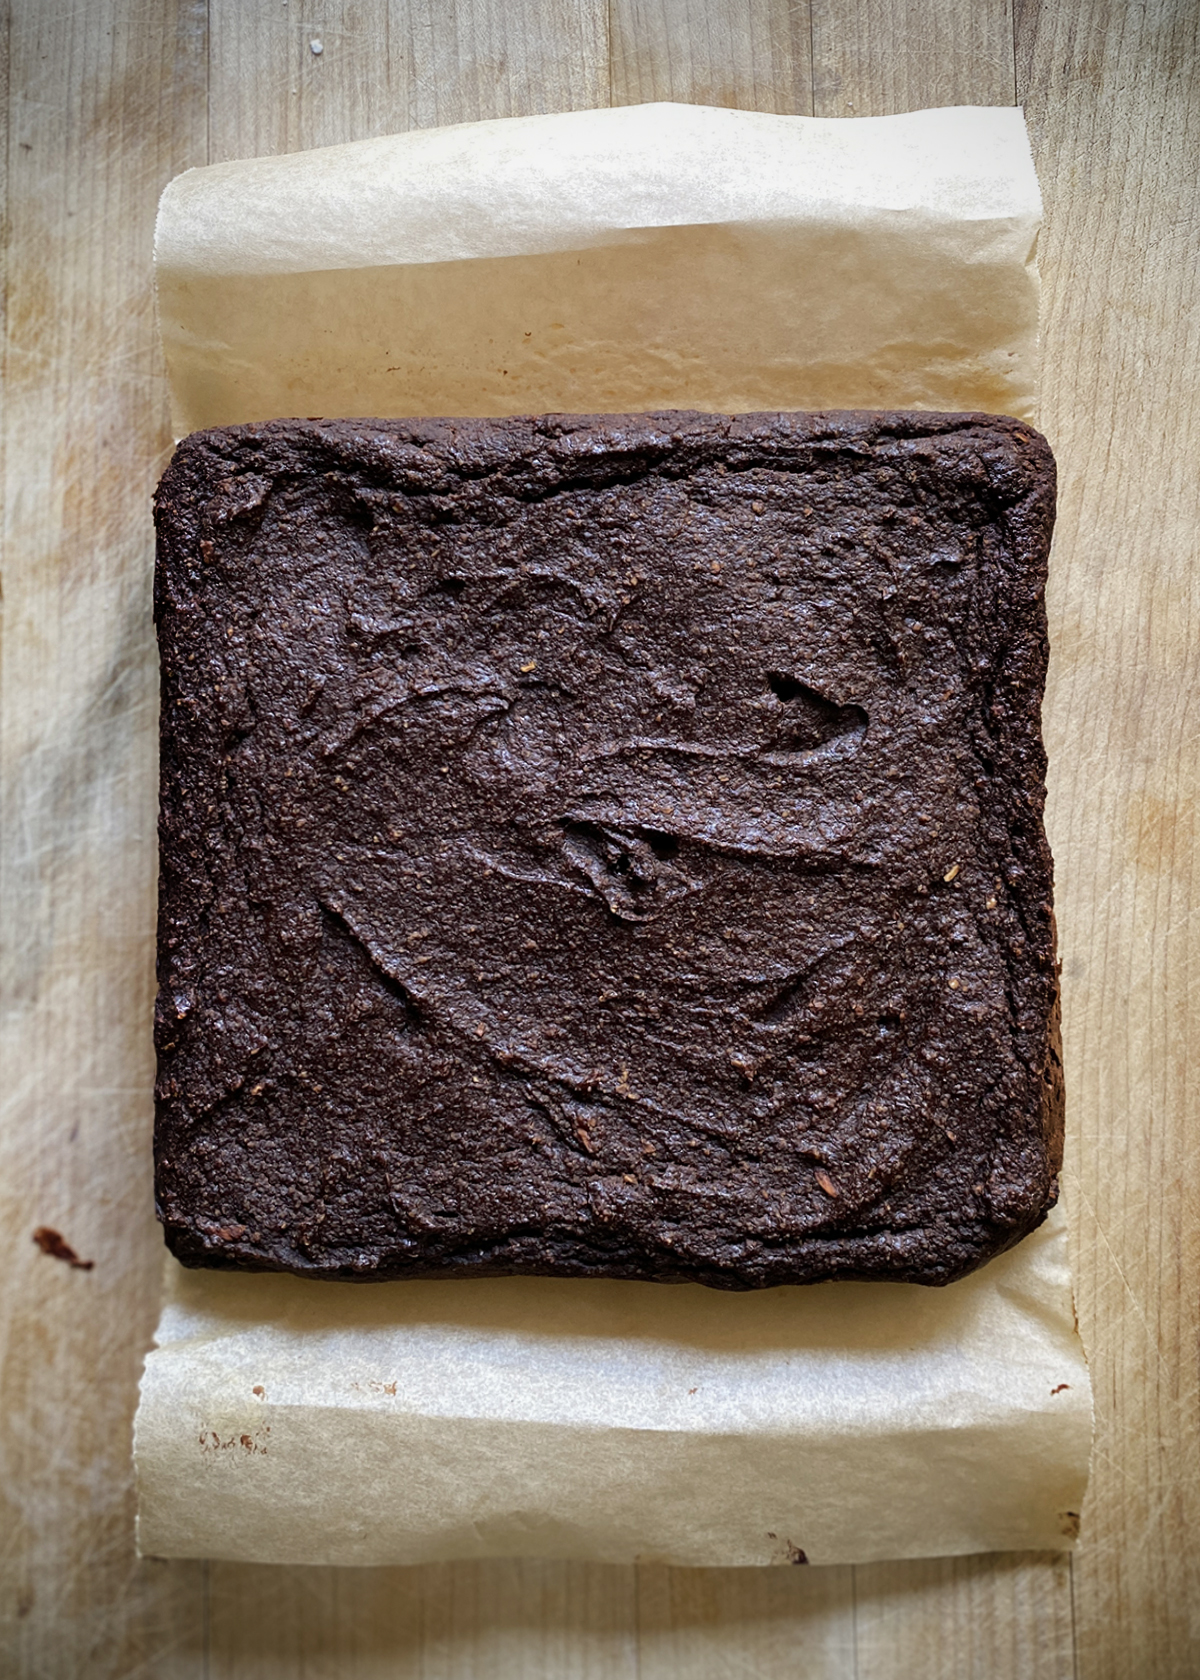 Brownie Baked Oatmeal cooking on parchment